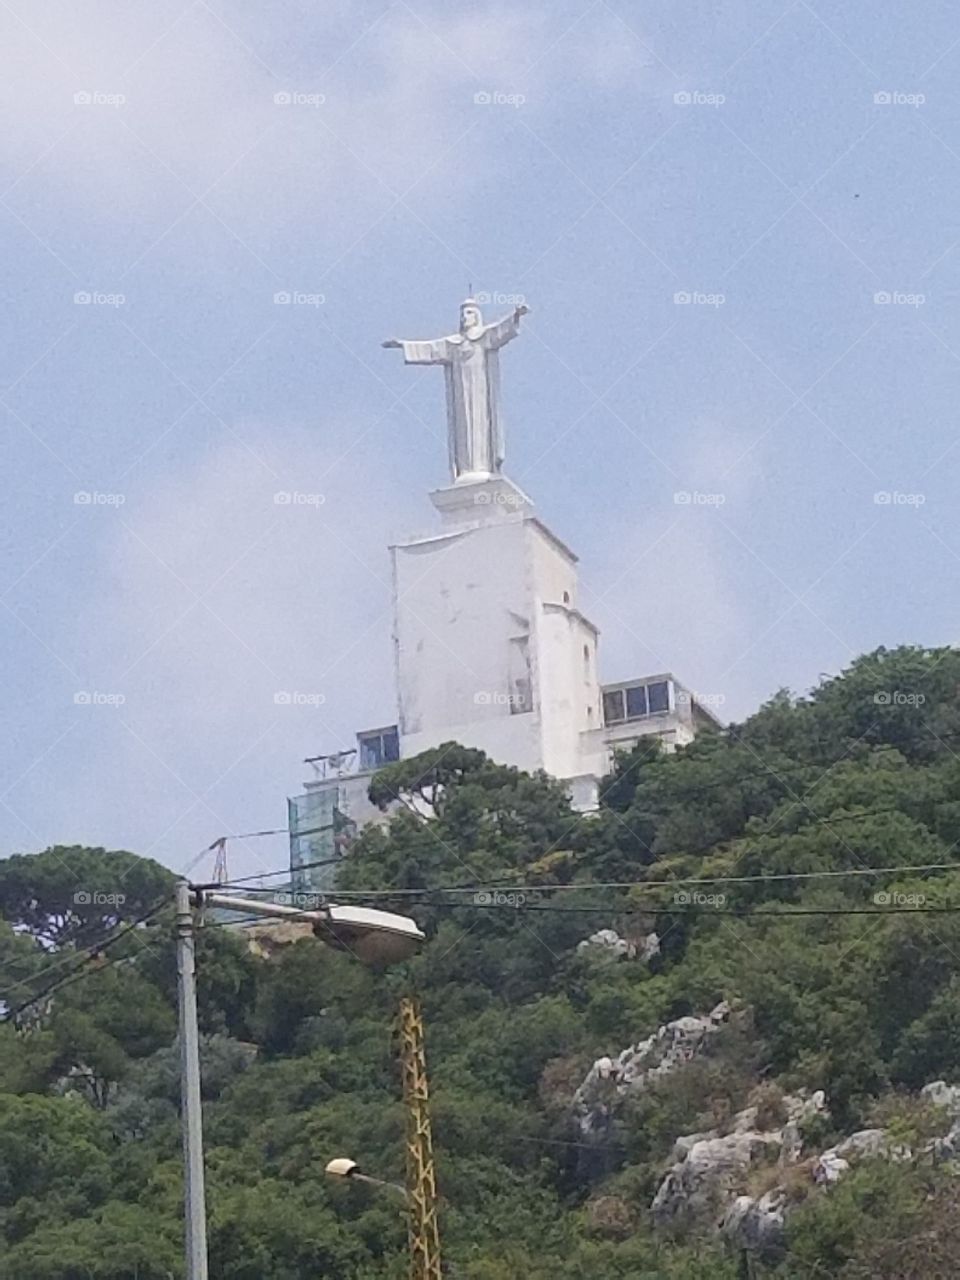 In 1950, Abouna Yaacoub purchased the hill located to the right of Nahr el-Kalb river, and started the construction of the convent and the church. On December 1, 1952, the hill was crowned by a statue of Christ the King, with a height of 12 meters, the width of its open hands reached 10 meters, and it weighed 75 tons, which was designed by the Italian artist Ernesto Pallini. Thus, the old dream came true after about fifty-eight years!

The statue of Christ the King is now erected on the hill called “The Ruins of Kings” in Zouk Mosbeh, Keserwan district, Mount Lebanon Governorate. Jesus refers with his right hand to Virgin Mary, in the temple of Our Lady of Lebanon, and with his left hand to the righteous educator, in the convent of Saint Joseph of The Tower, as if he is reuniting the Nazareth family here again! While all those kings and greats whose names are carved on those rocks are lost in the unseen and oblivion! They are all gone, and Jesus is staying as is, yesterday, today and forever.